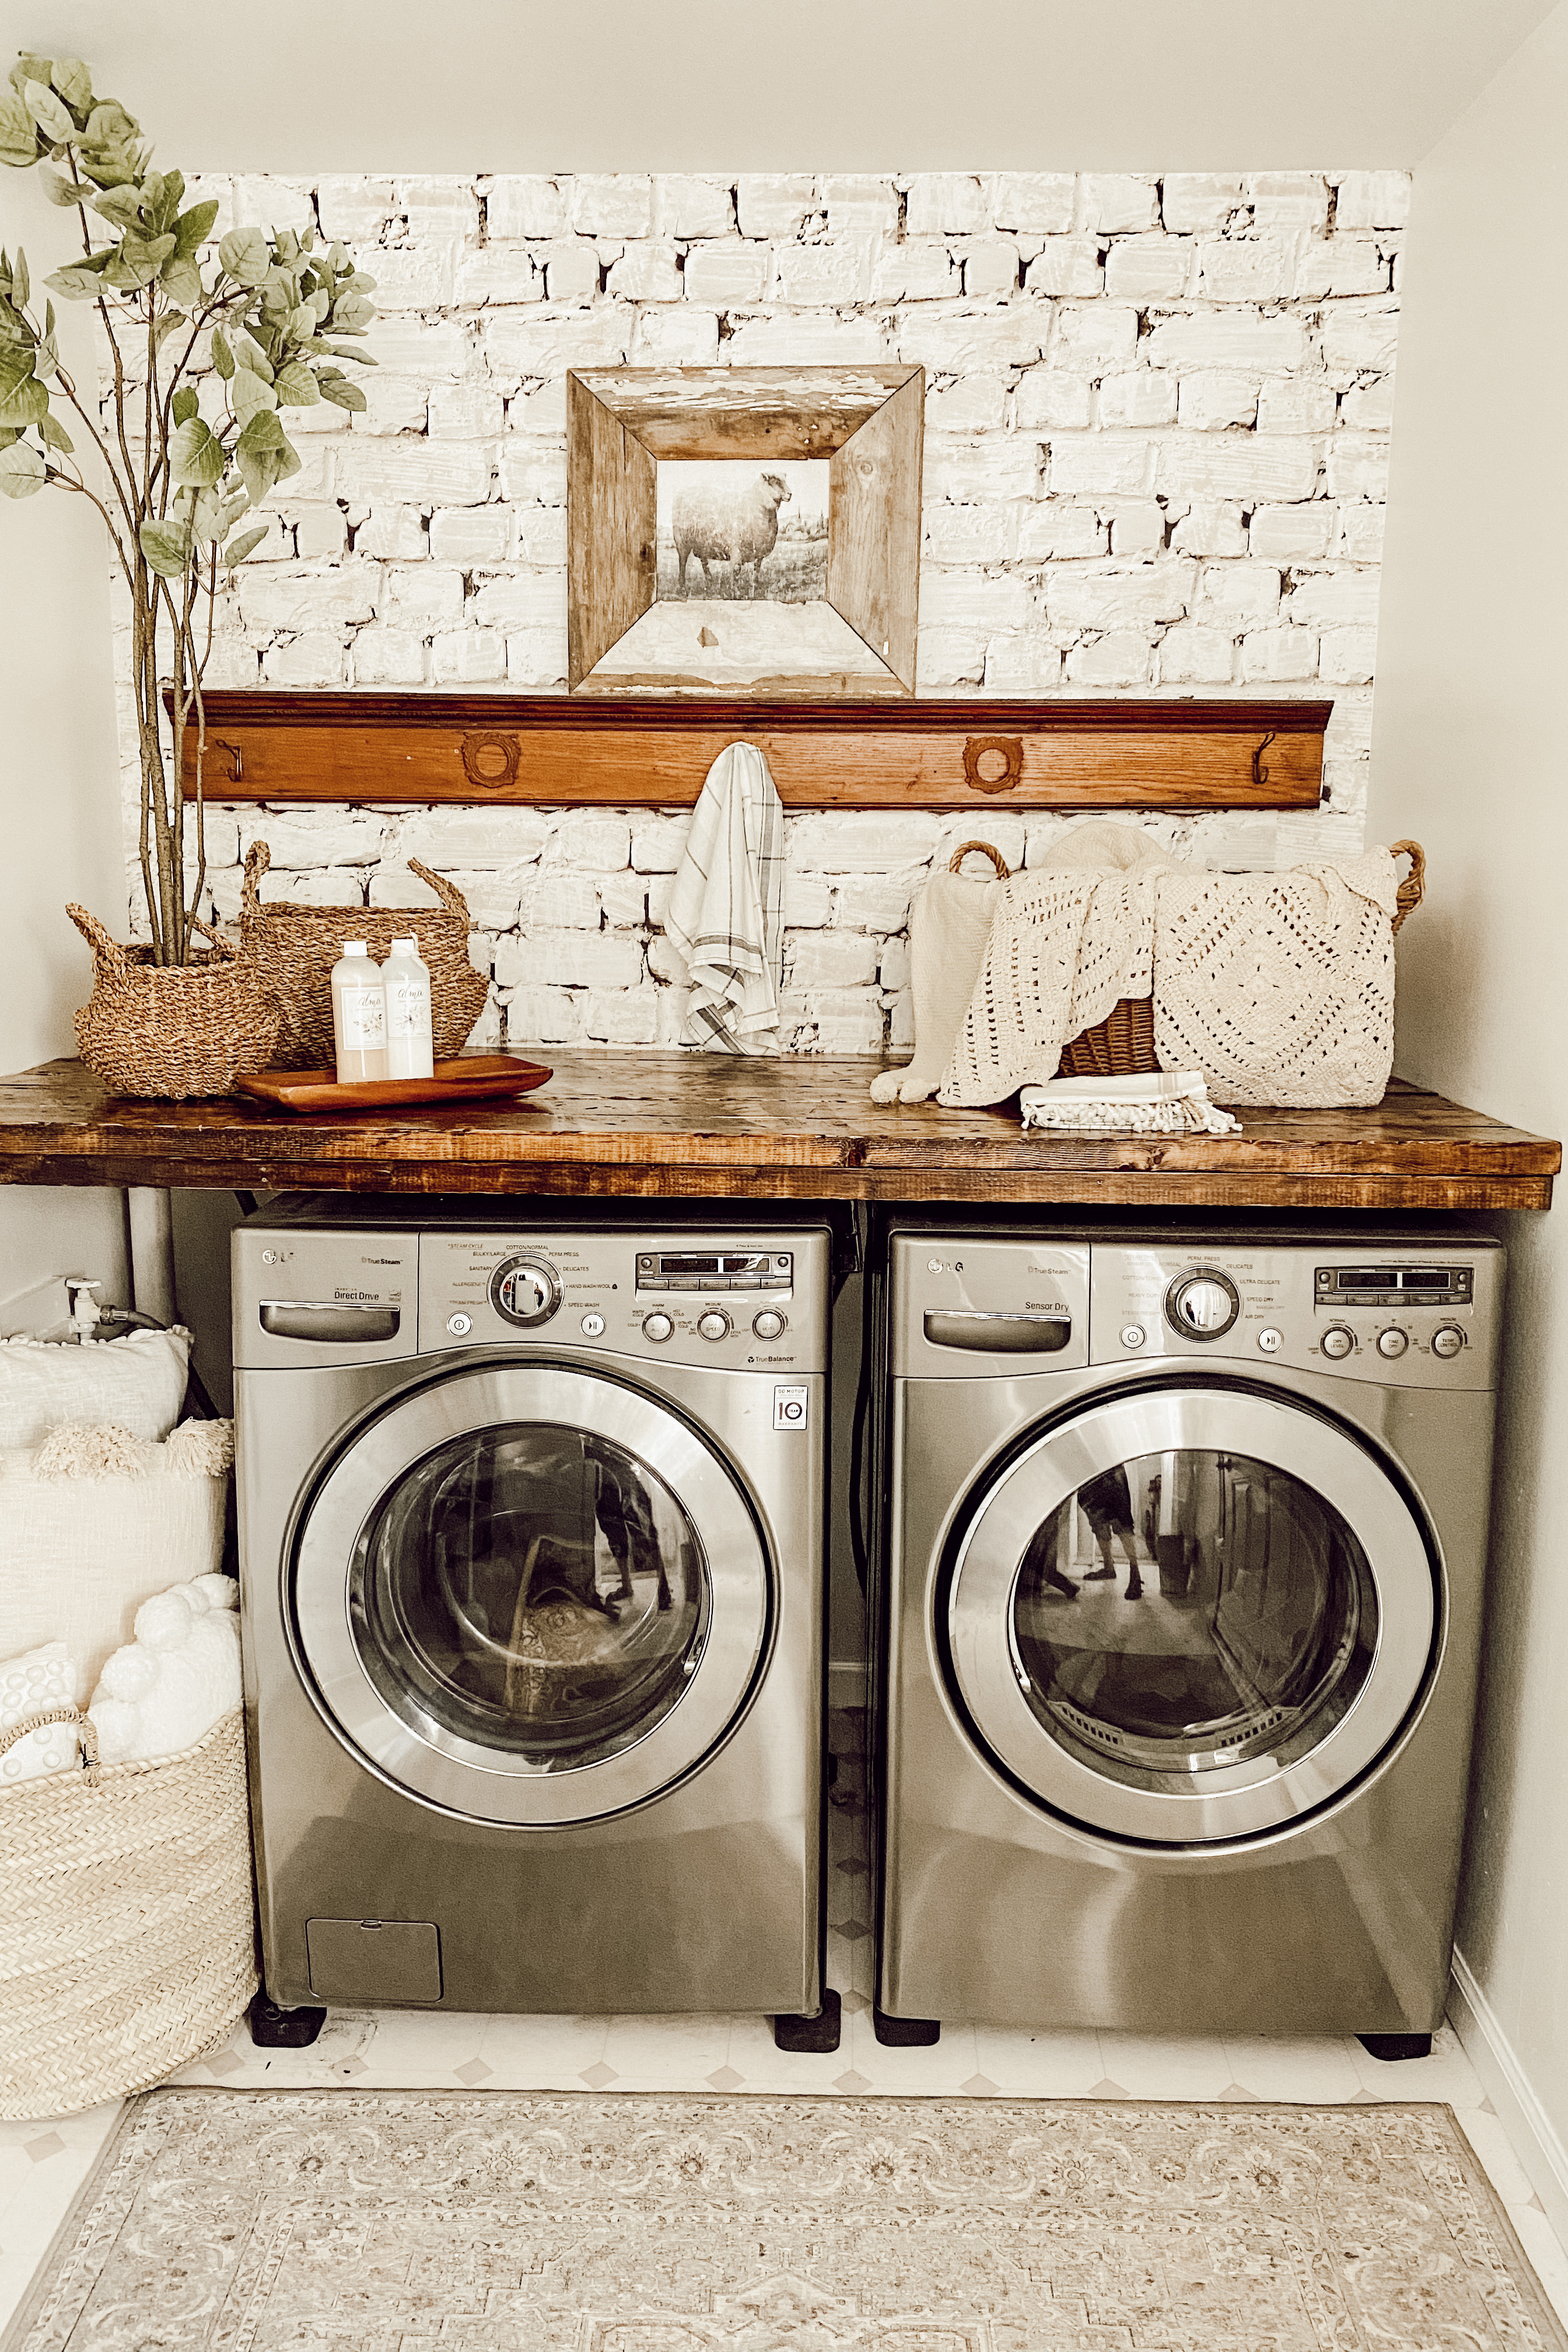 Washer and Dryer Countertop